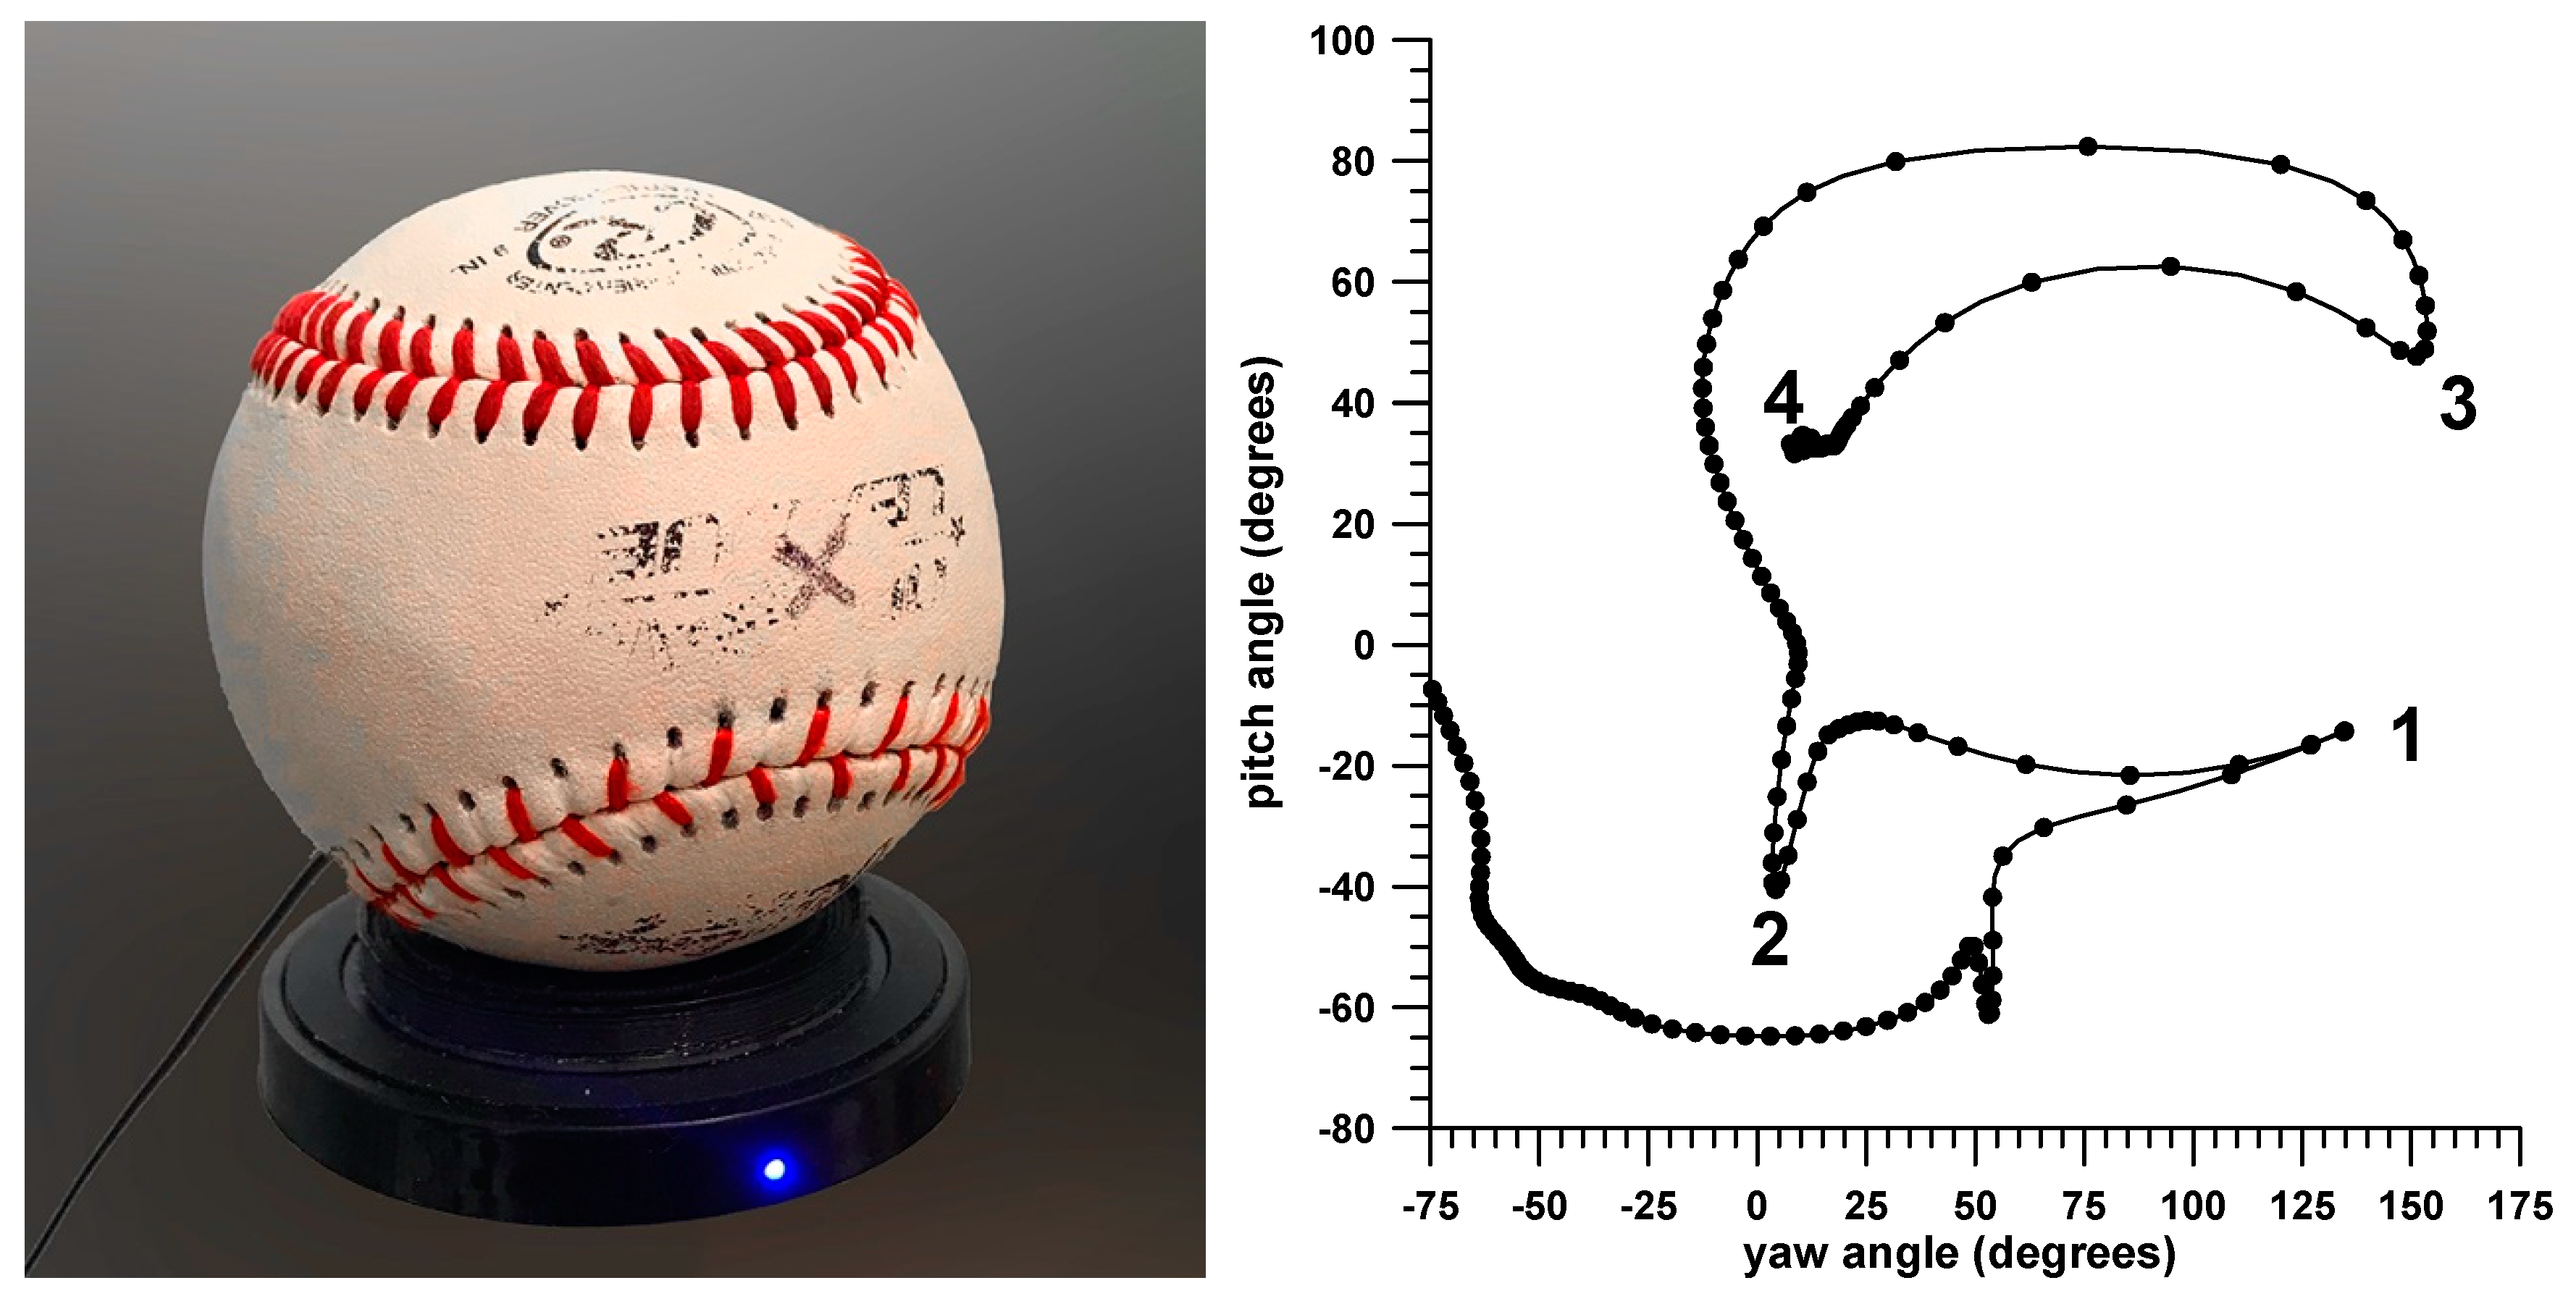 New research shows high-velocity pitchers should trust fastball